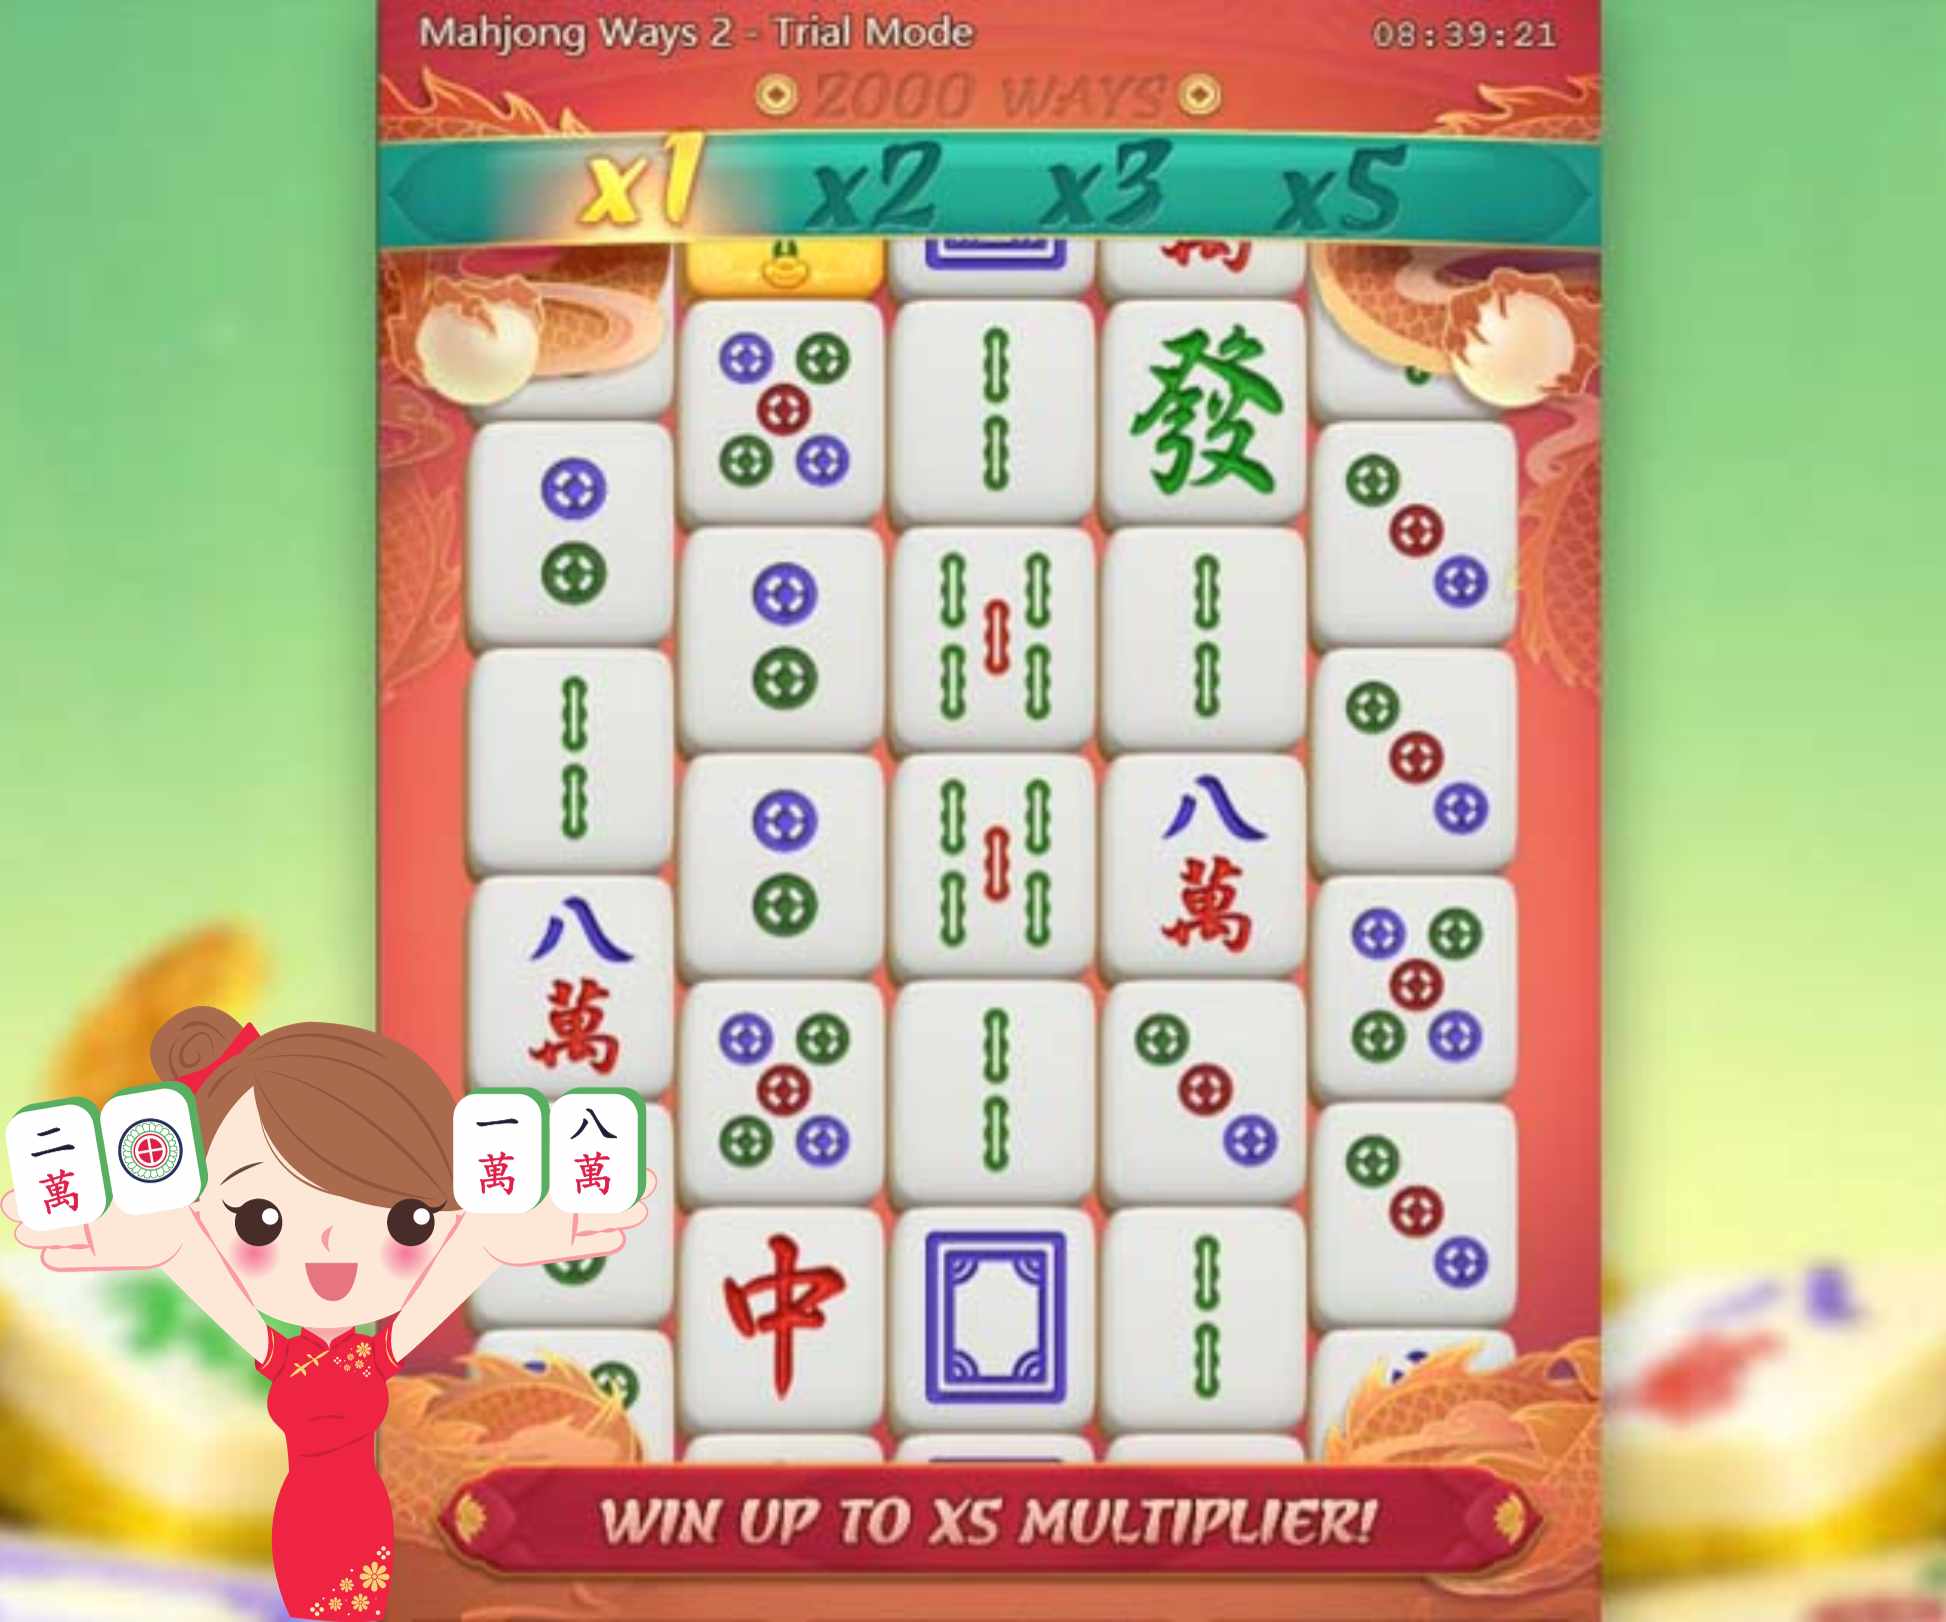 Mahjong is a game from China that sharpens your skills